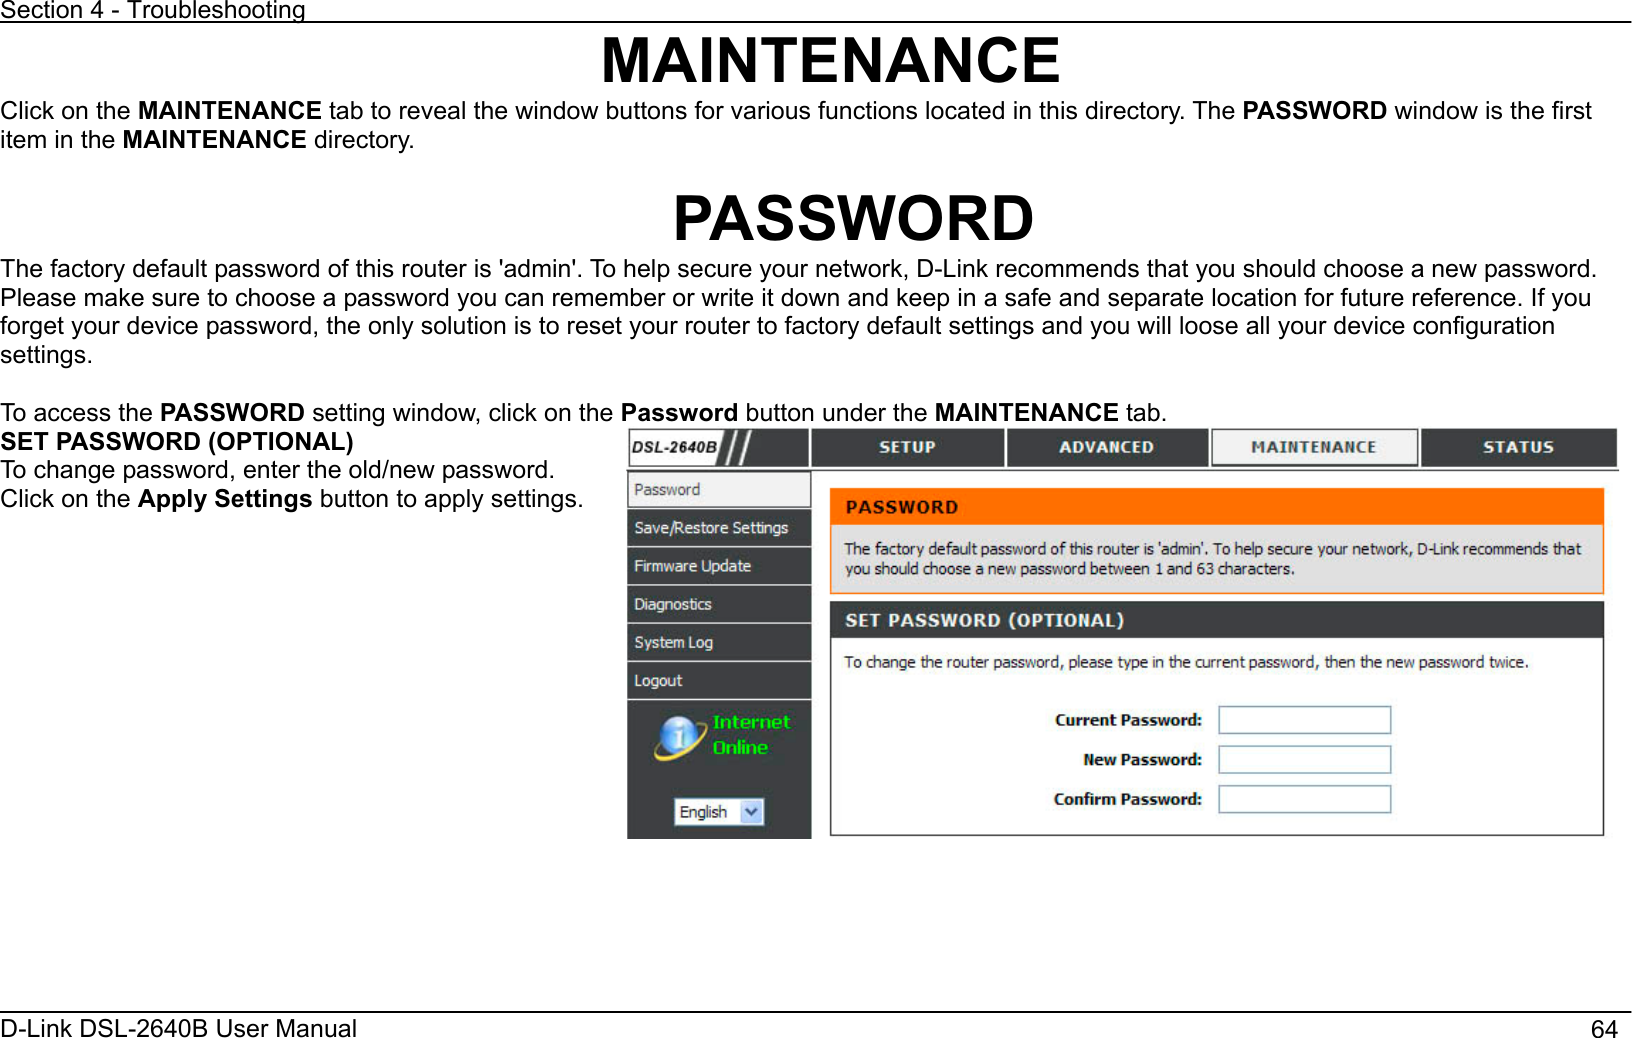 Section 4 - Troubleshooting D-Link DSL-2640B User Manual                                       64MAINTENANCEClick on the MAINTENANCE tab to reveal the window buttons for various functions located in this directory. The PASSWORD window is the first item in the MAINTENANCE directory. PASSWORD The factory default password of this router is &apos;admin&apos;. To help secure your network, D-Link recommends that you should choose a new password.Please make sure to choose a password you can remember or write it down and keep in a safe and separate location for future reference. If you forget your device password, the only solution is to reset your router to factory default settings and you will loose all your device configuration settings.To access the PASSWORD setting window, click on the Password button under the MAINTENANCE tab. SET PASSWORD (OPTIONAL) To change password, enter the old/new password. Click on the Apply Settings button to apply settings. 